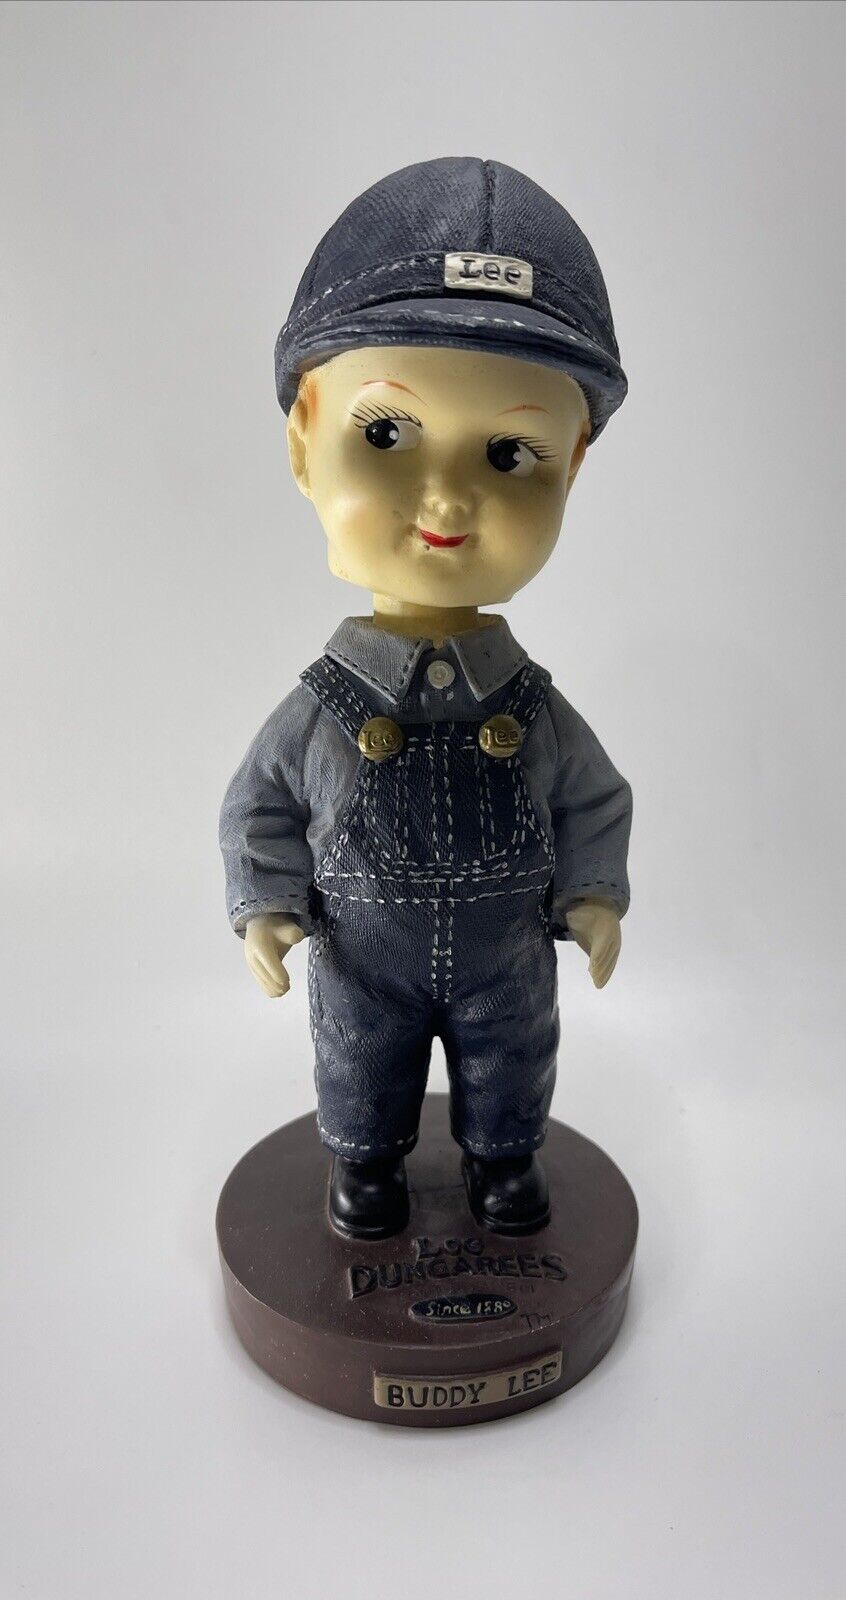 BUDDY LEE Dungarees Overalls Bobble Head DOLL 